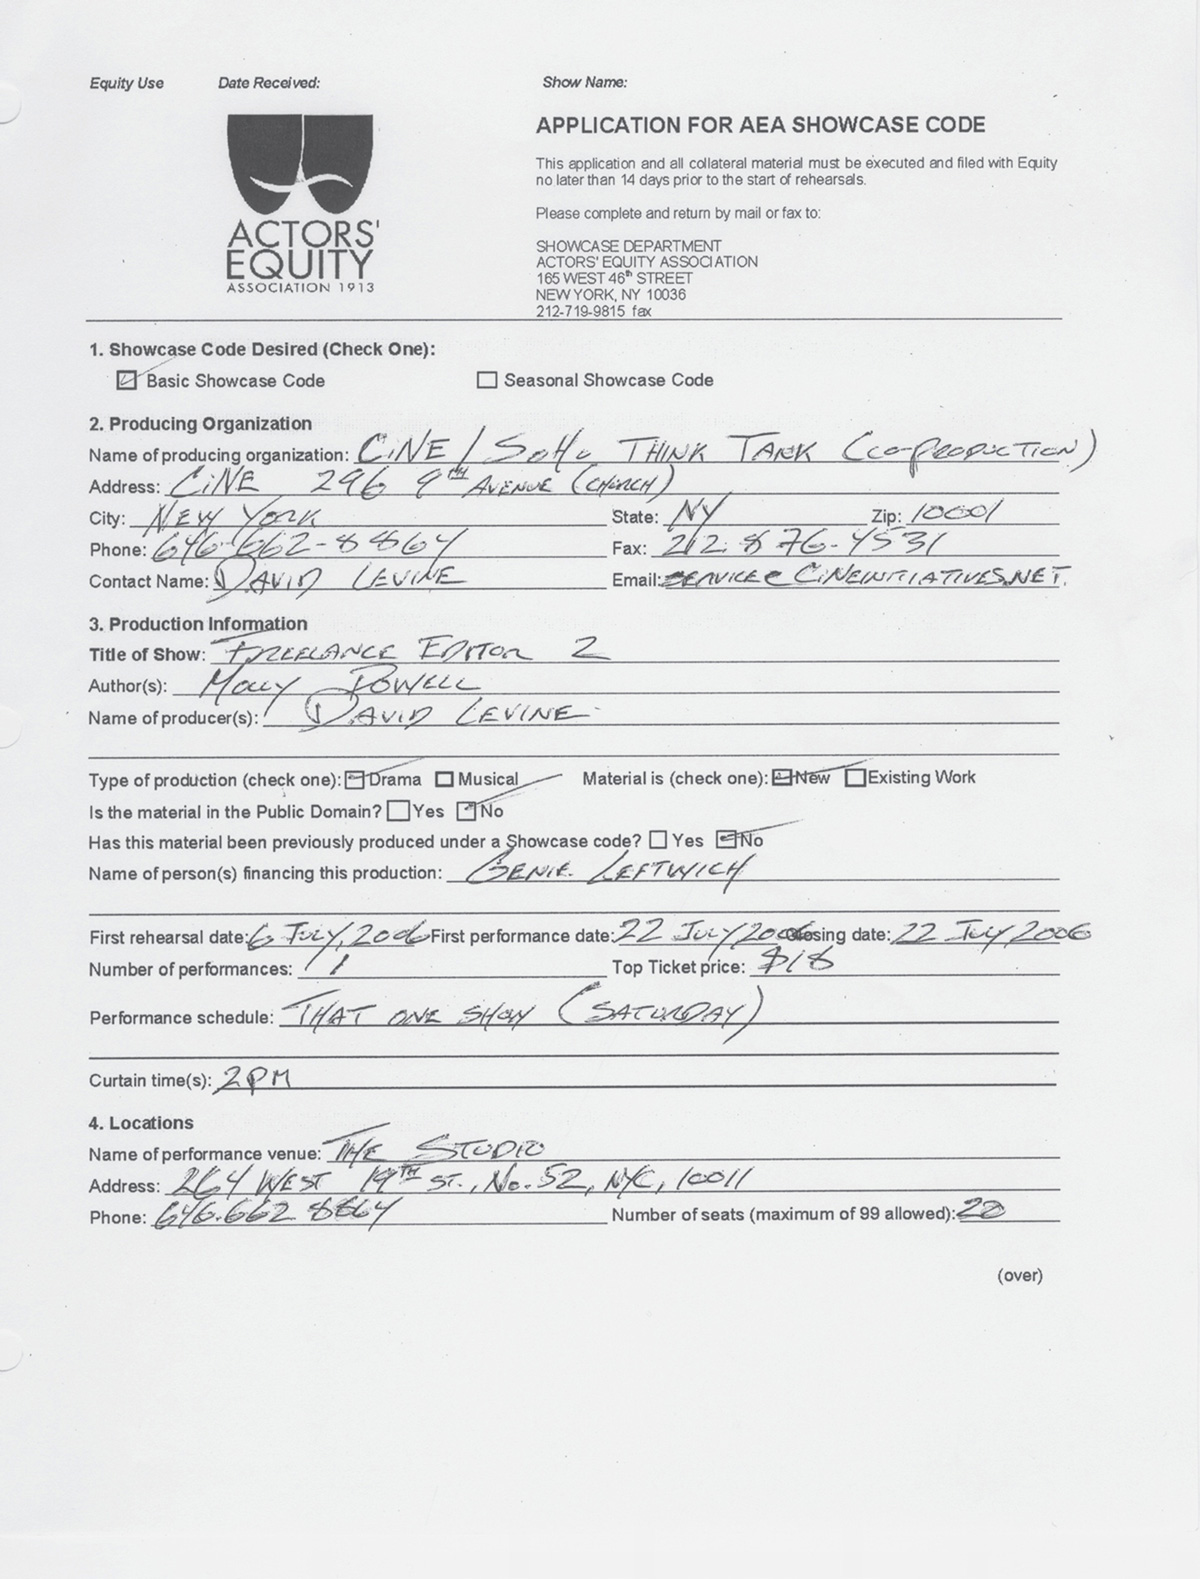 The second page of the contract between artist David Levine and actor Molly Powell for her to act as a freelance editor.